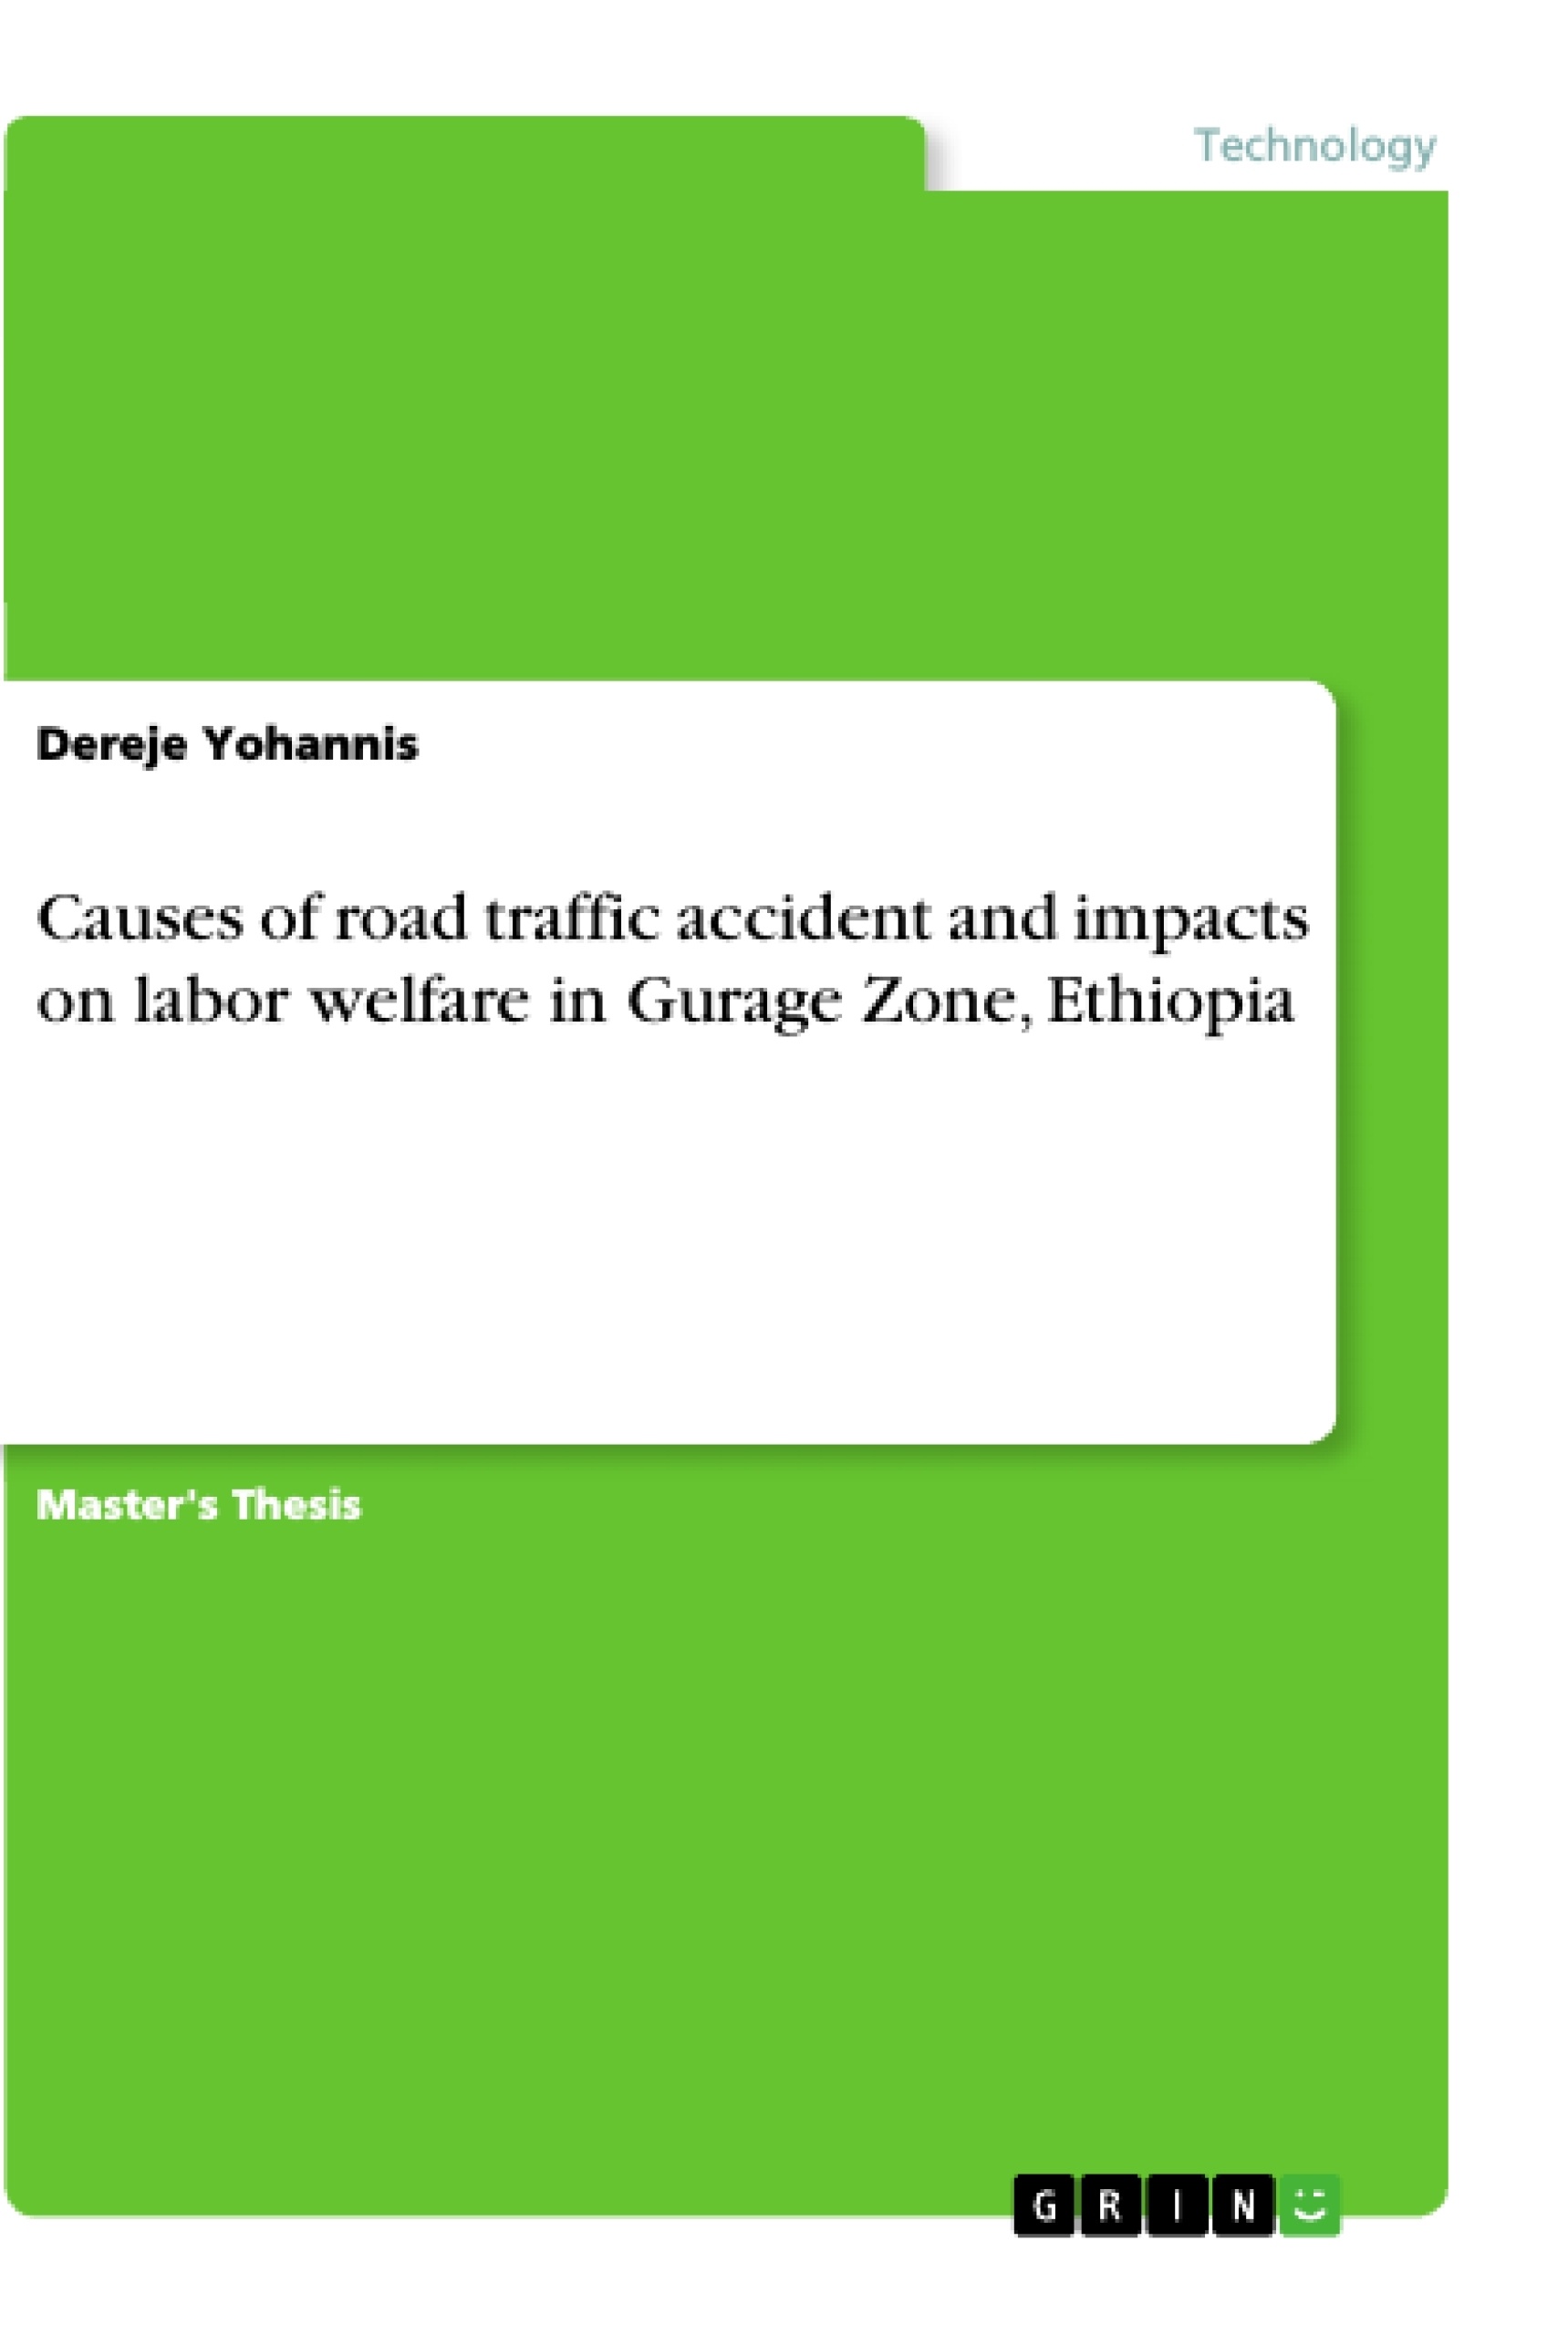 GRIN　road　impacts　in　Ethiopia　and　Zone,　on　traffic　accident　Gurage　Causes　welfare　of　labor